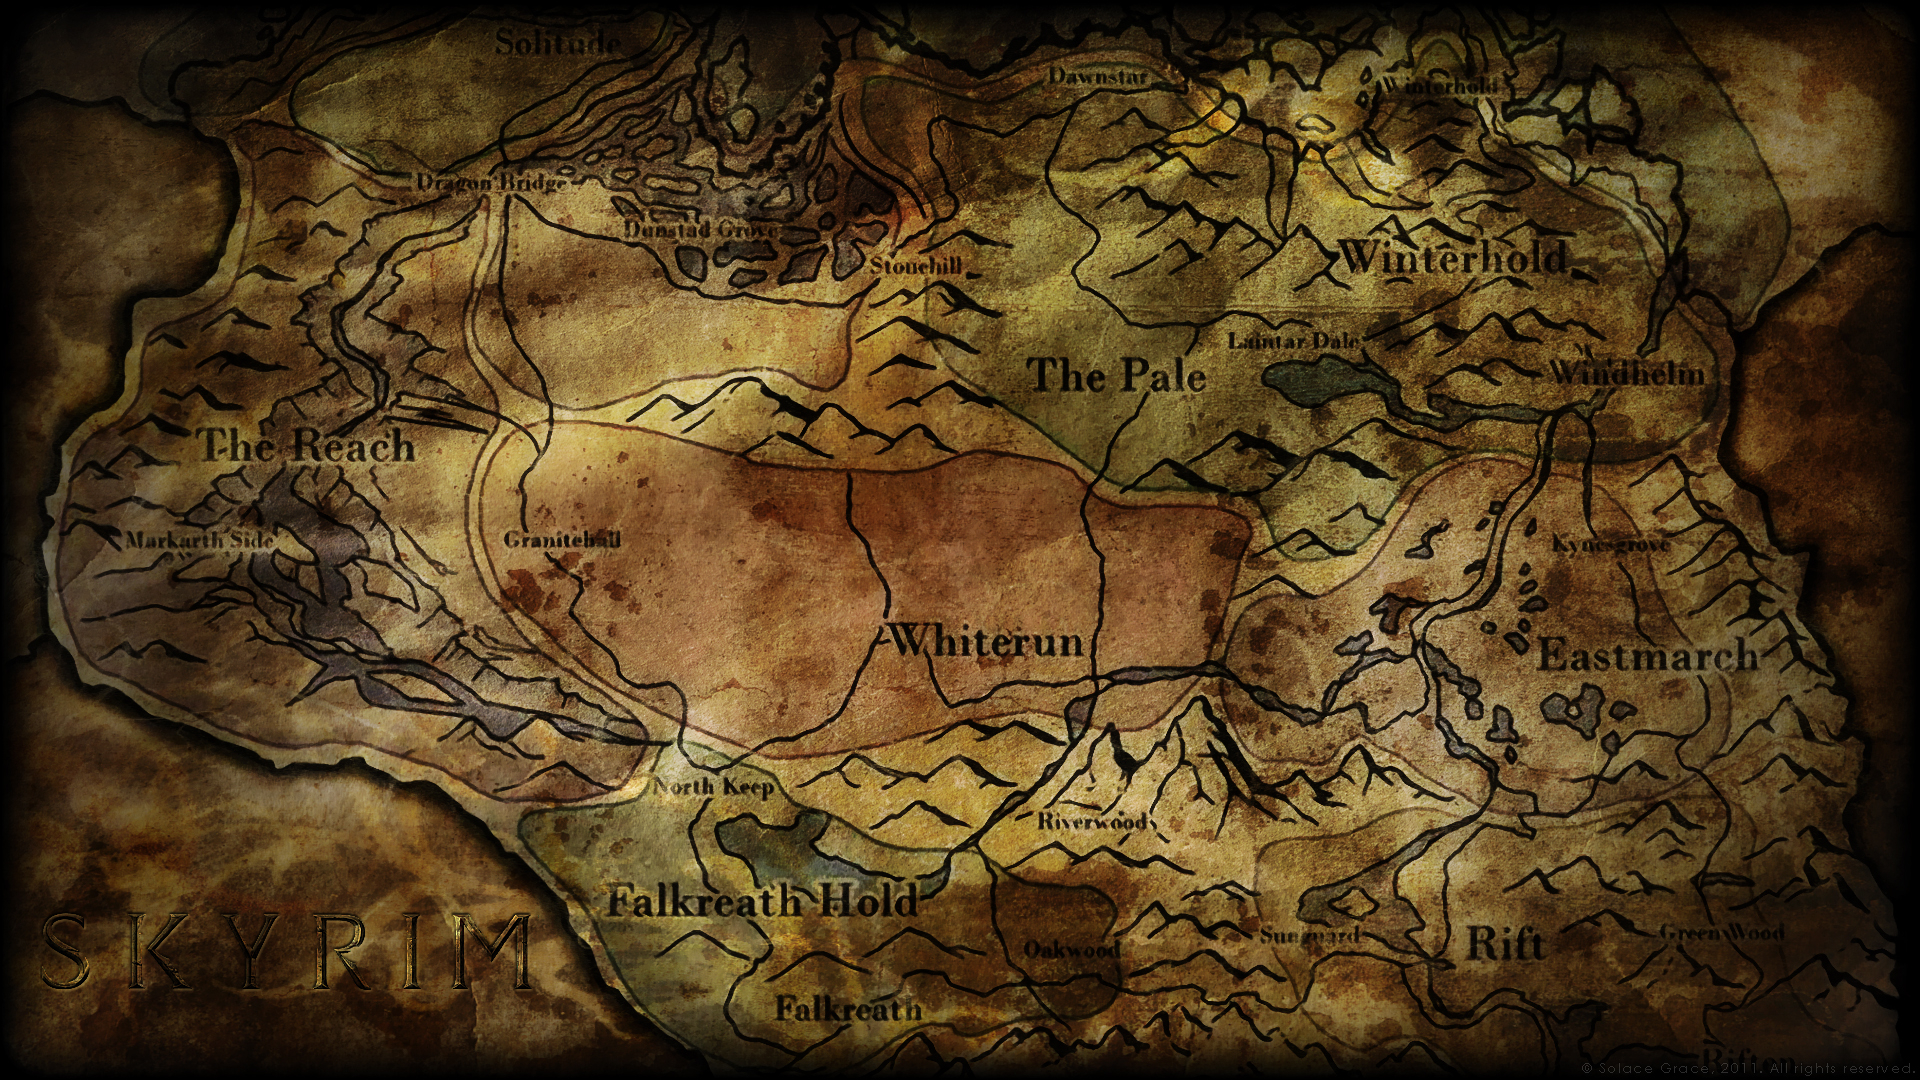 1920x1080 Skyrim Map Over 25 Different Maps of Skyrim to Map Out Your Journey